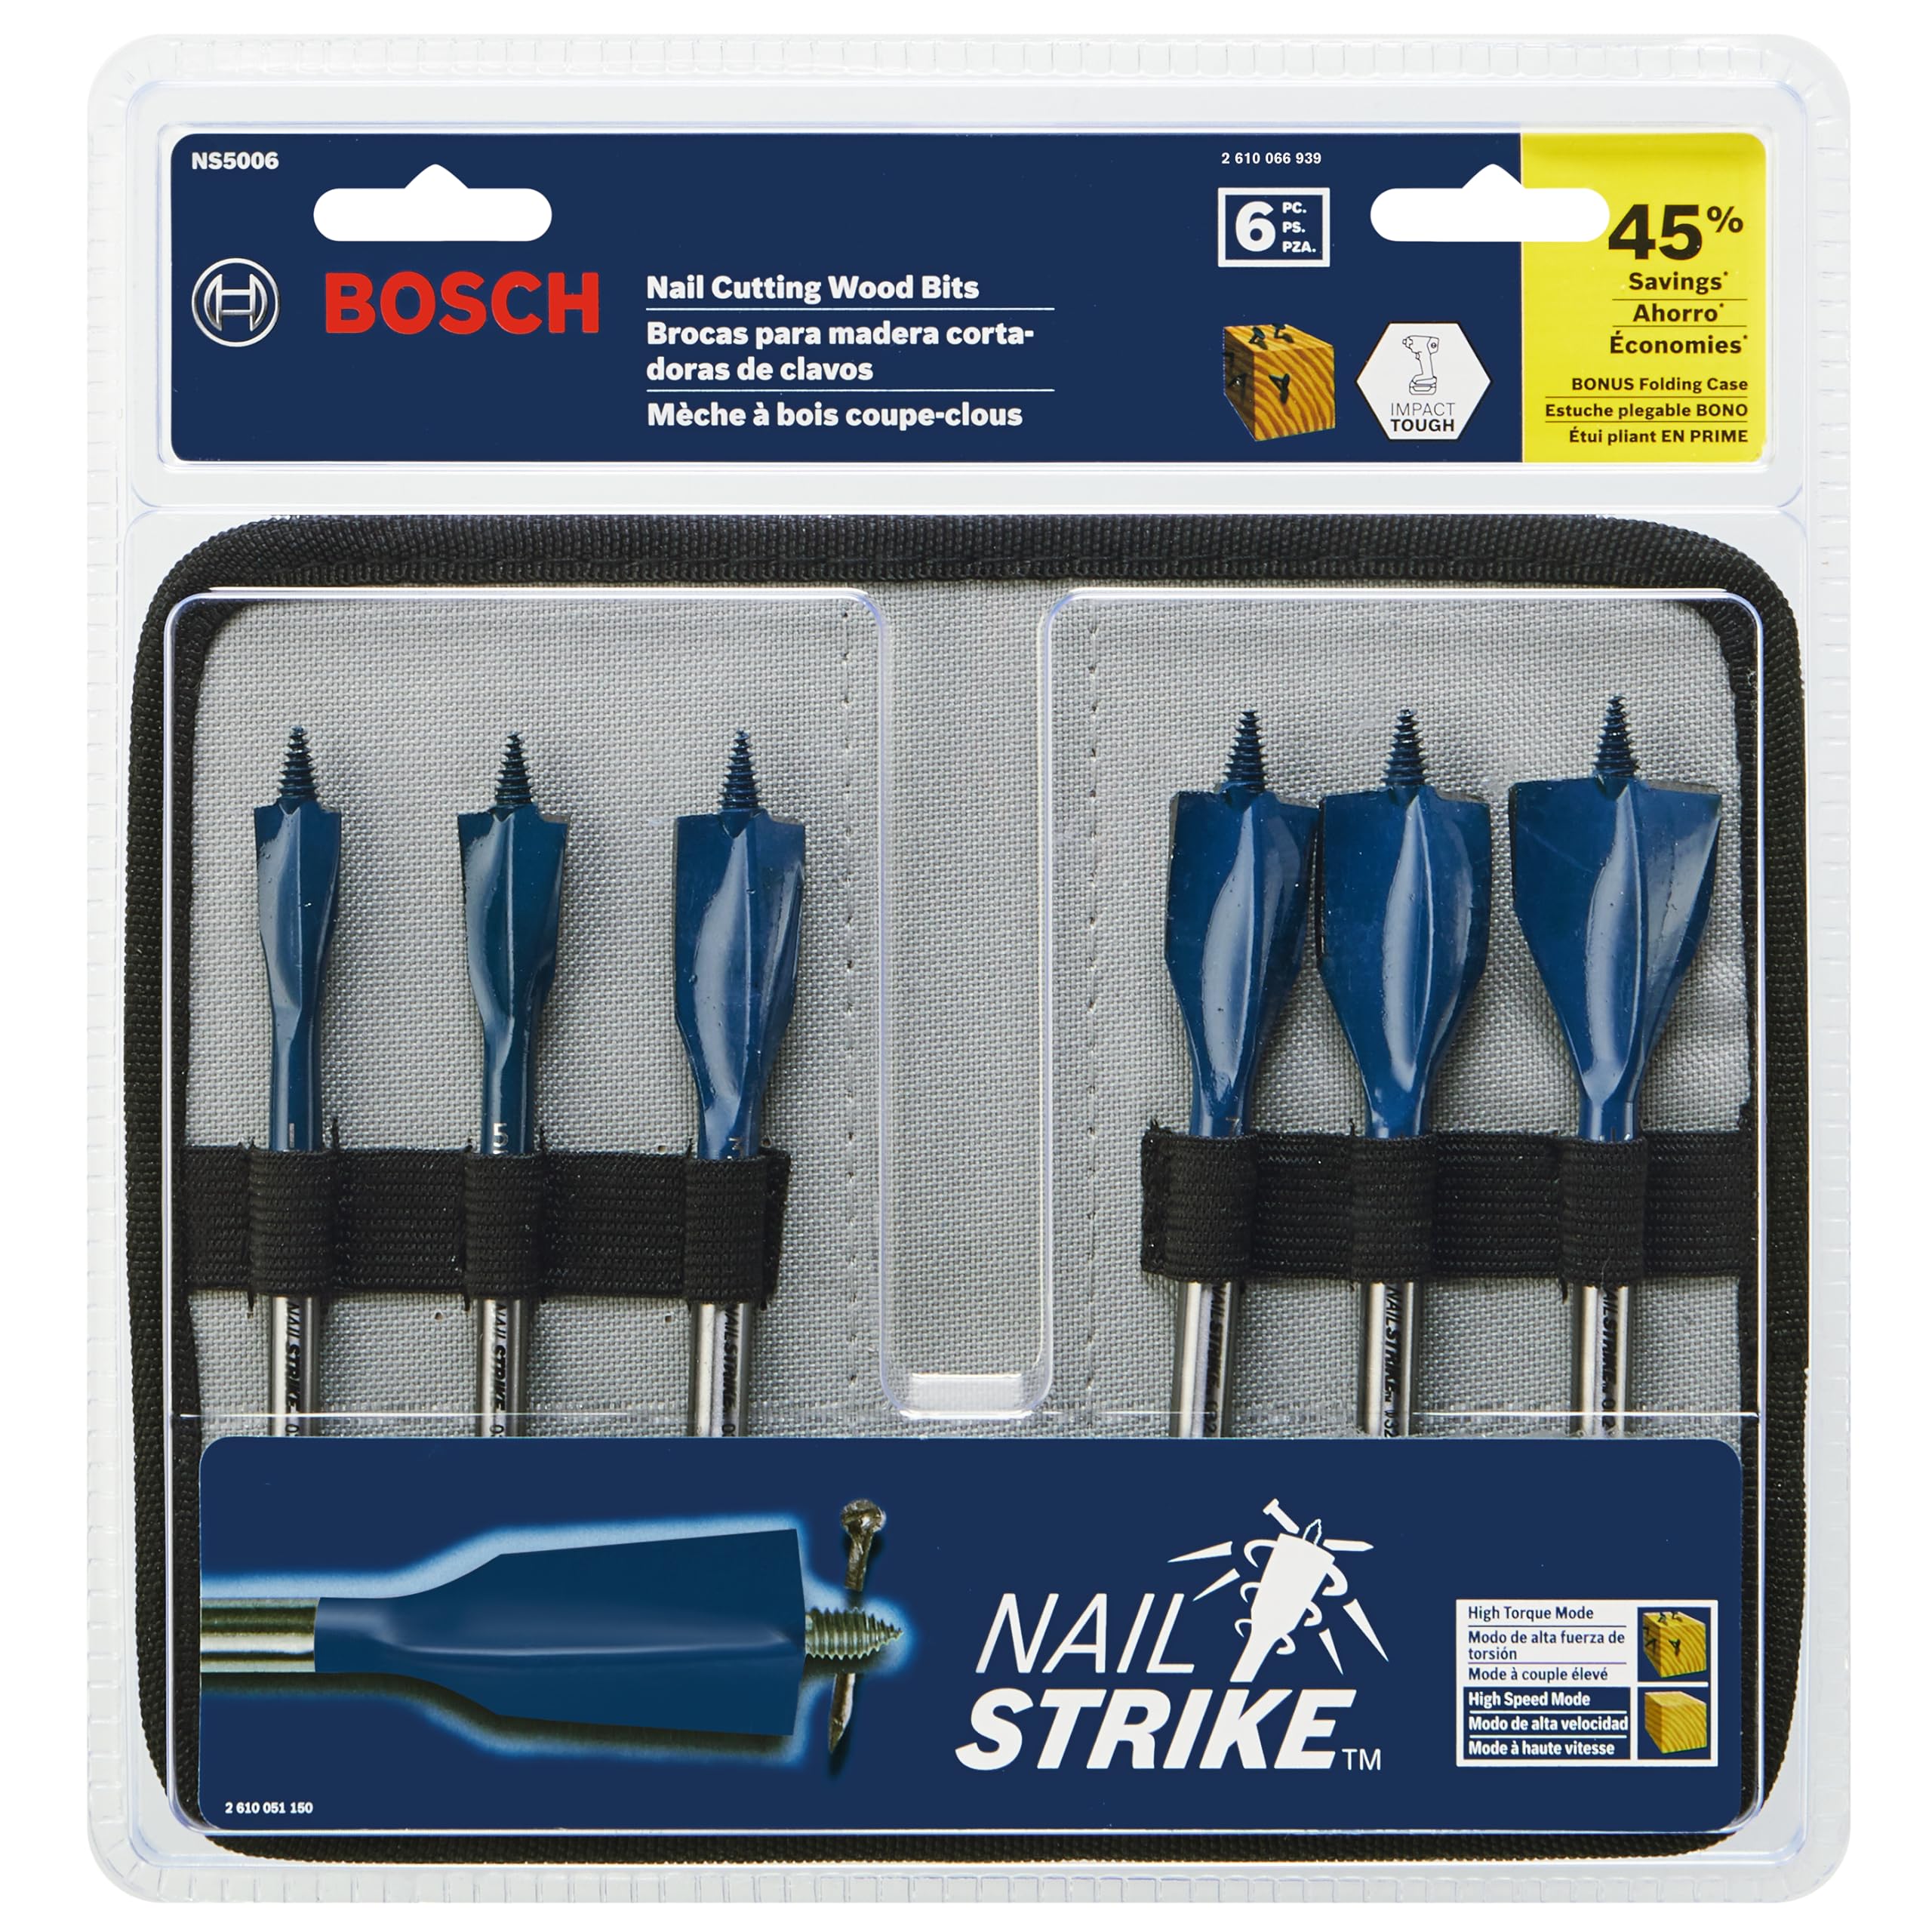 BOSCH NS5006 6-Piece Nail Strike Wood-Boring Spade Bits Assorted Set with Included Pouch Optimized for Wood and Wood with Nails